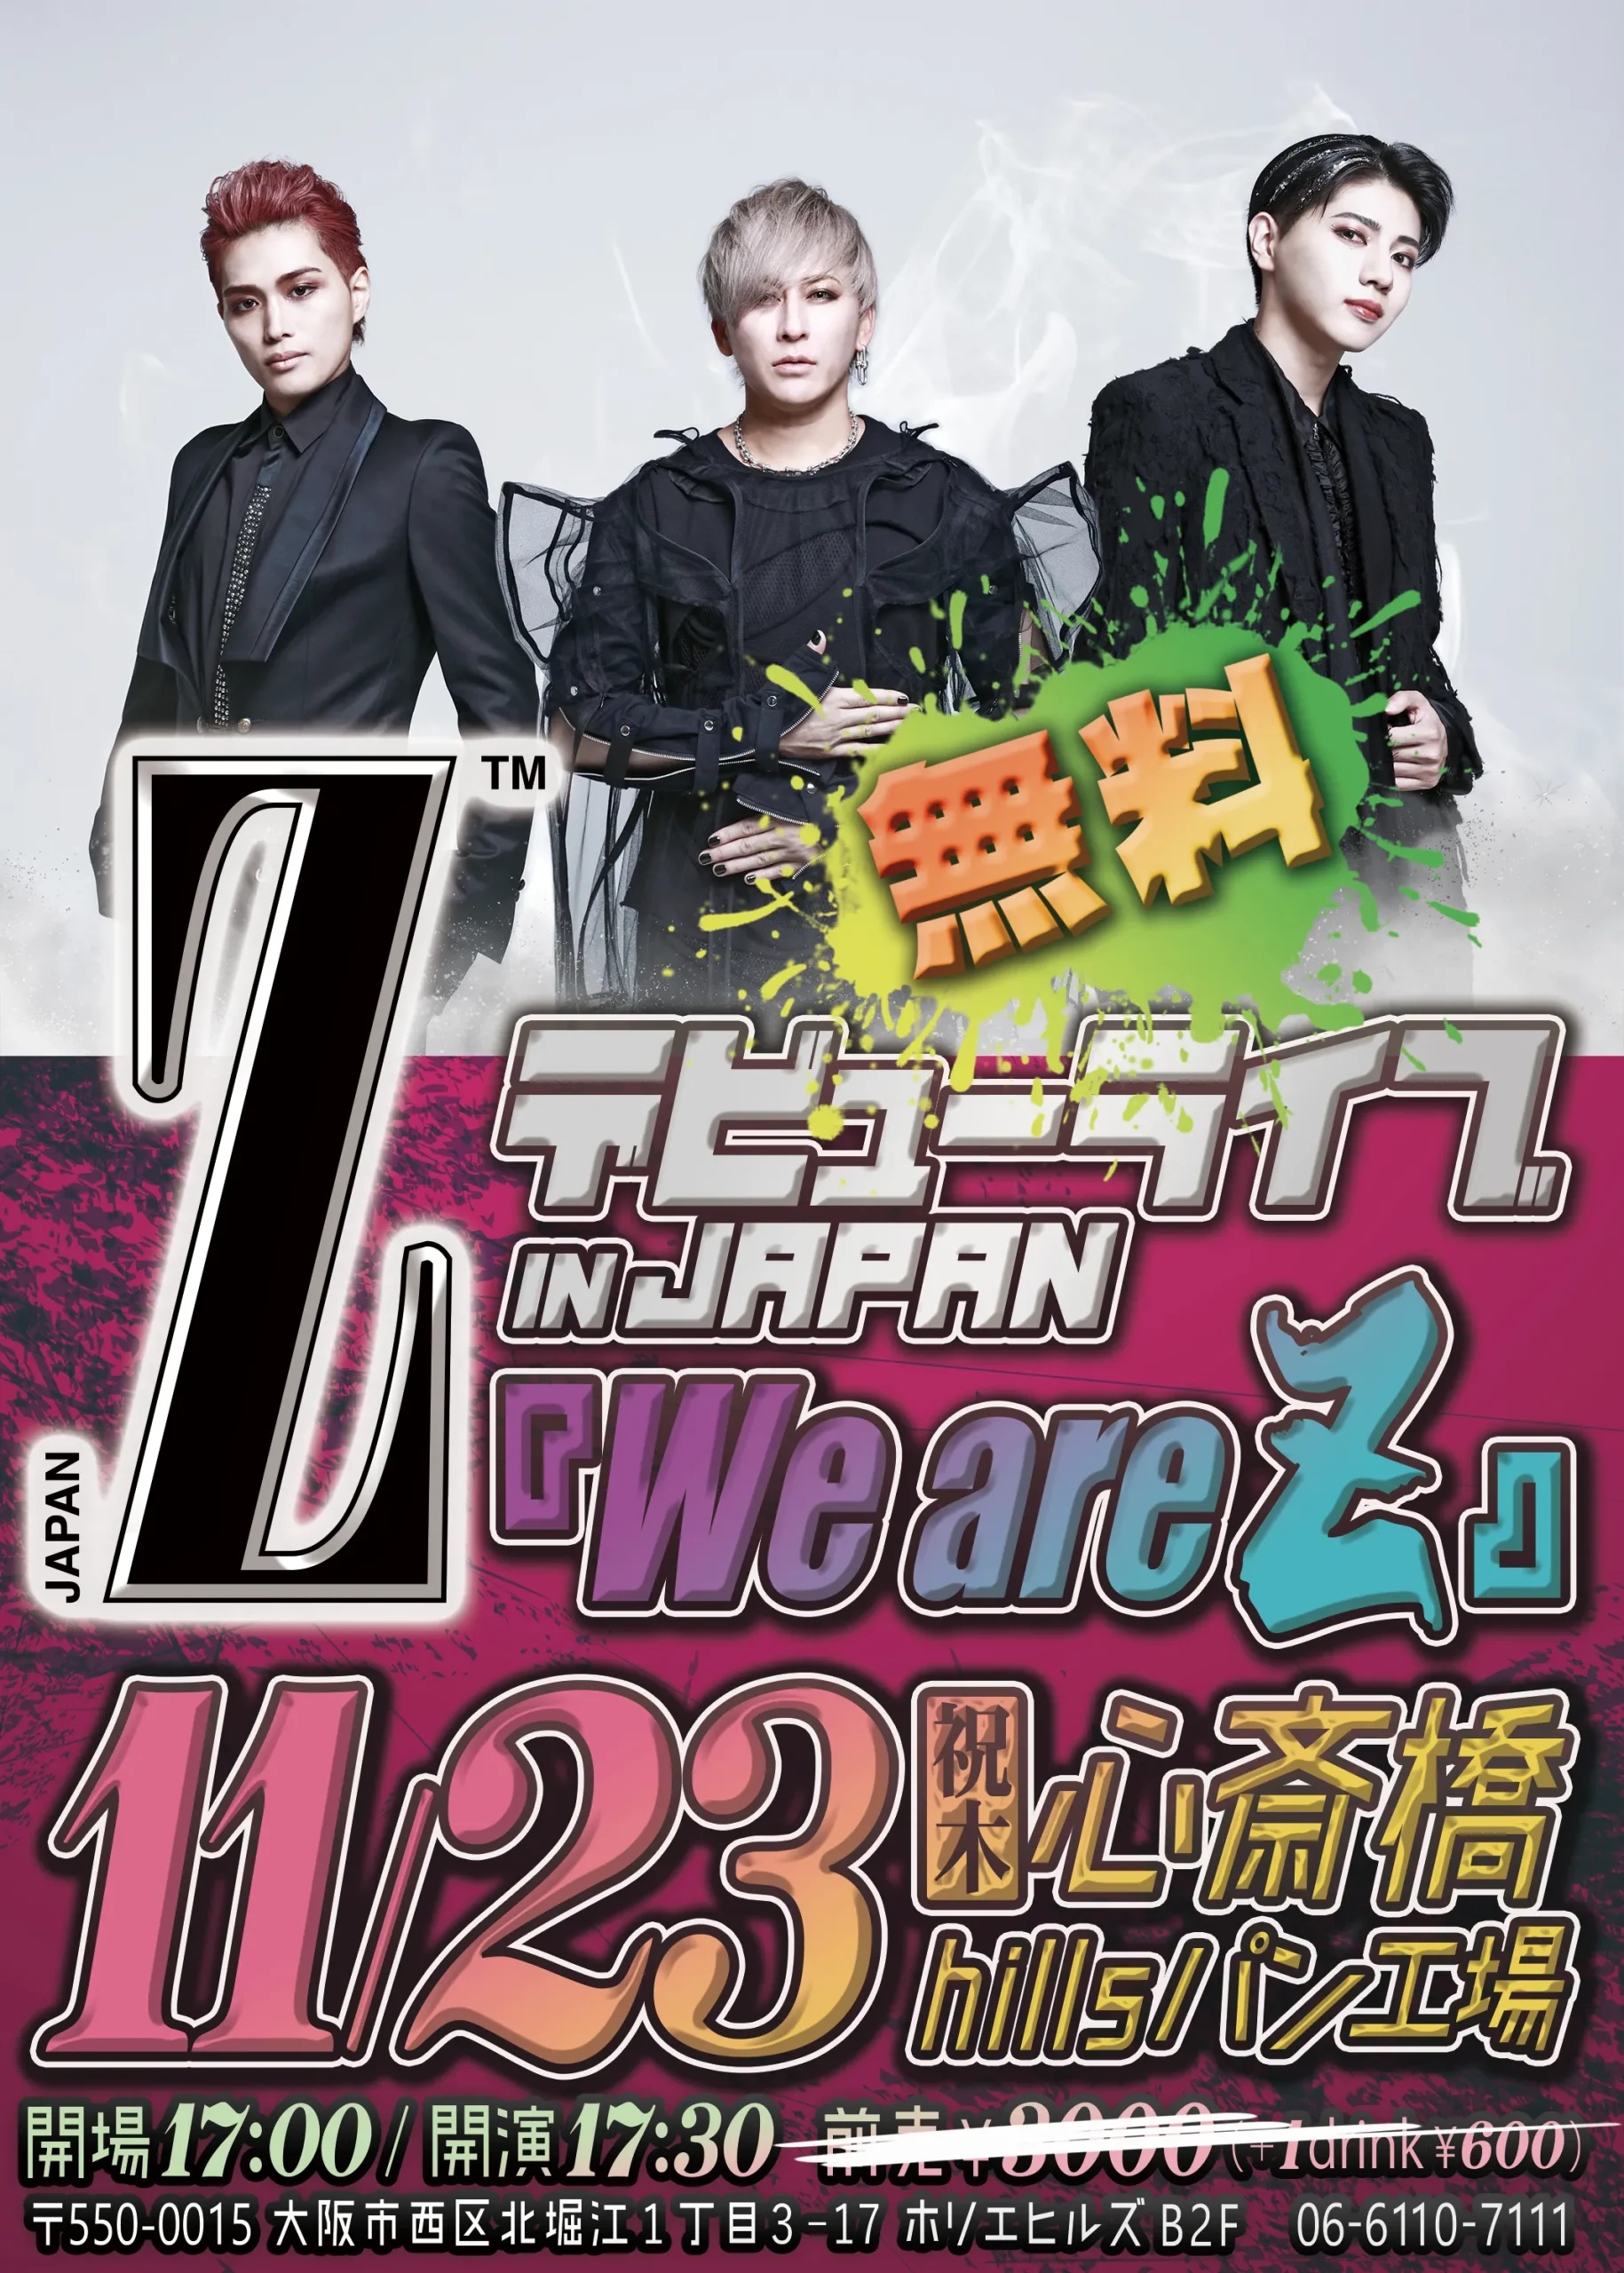 Z debut live in JAPAN “We are Z” tickets free